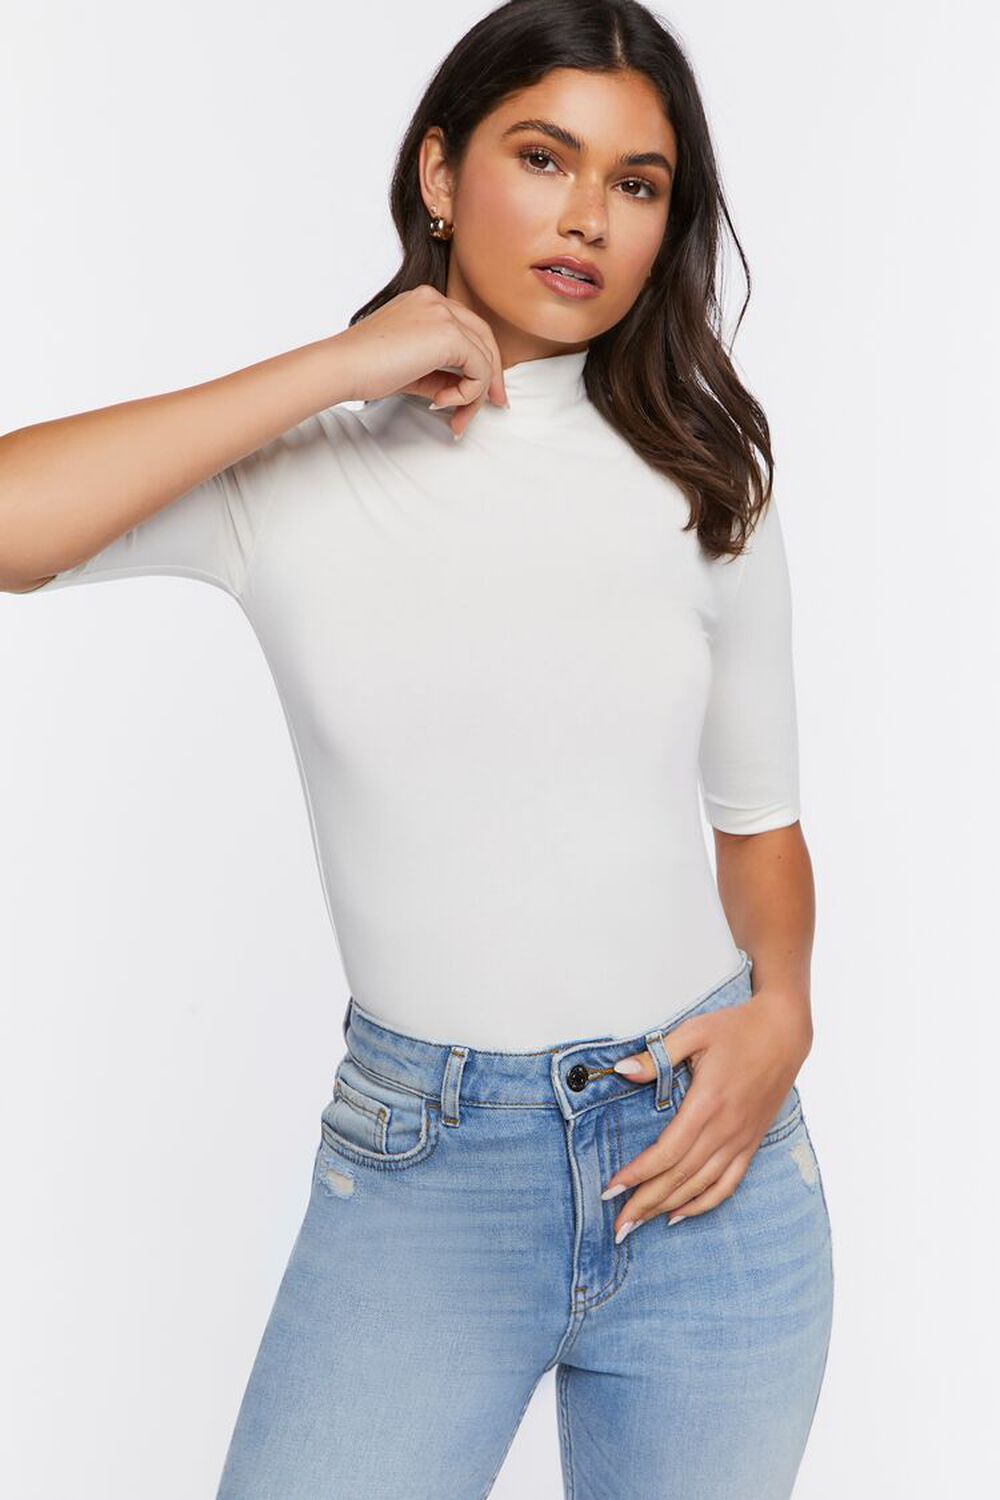 CREAM Fitted Turtleneck Top, image 1